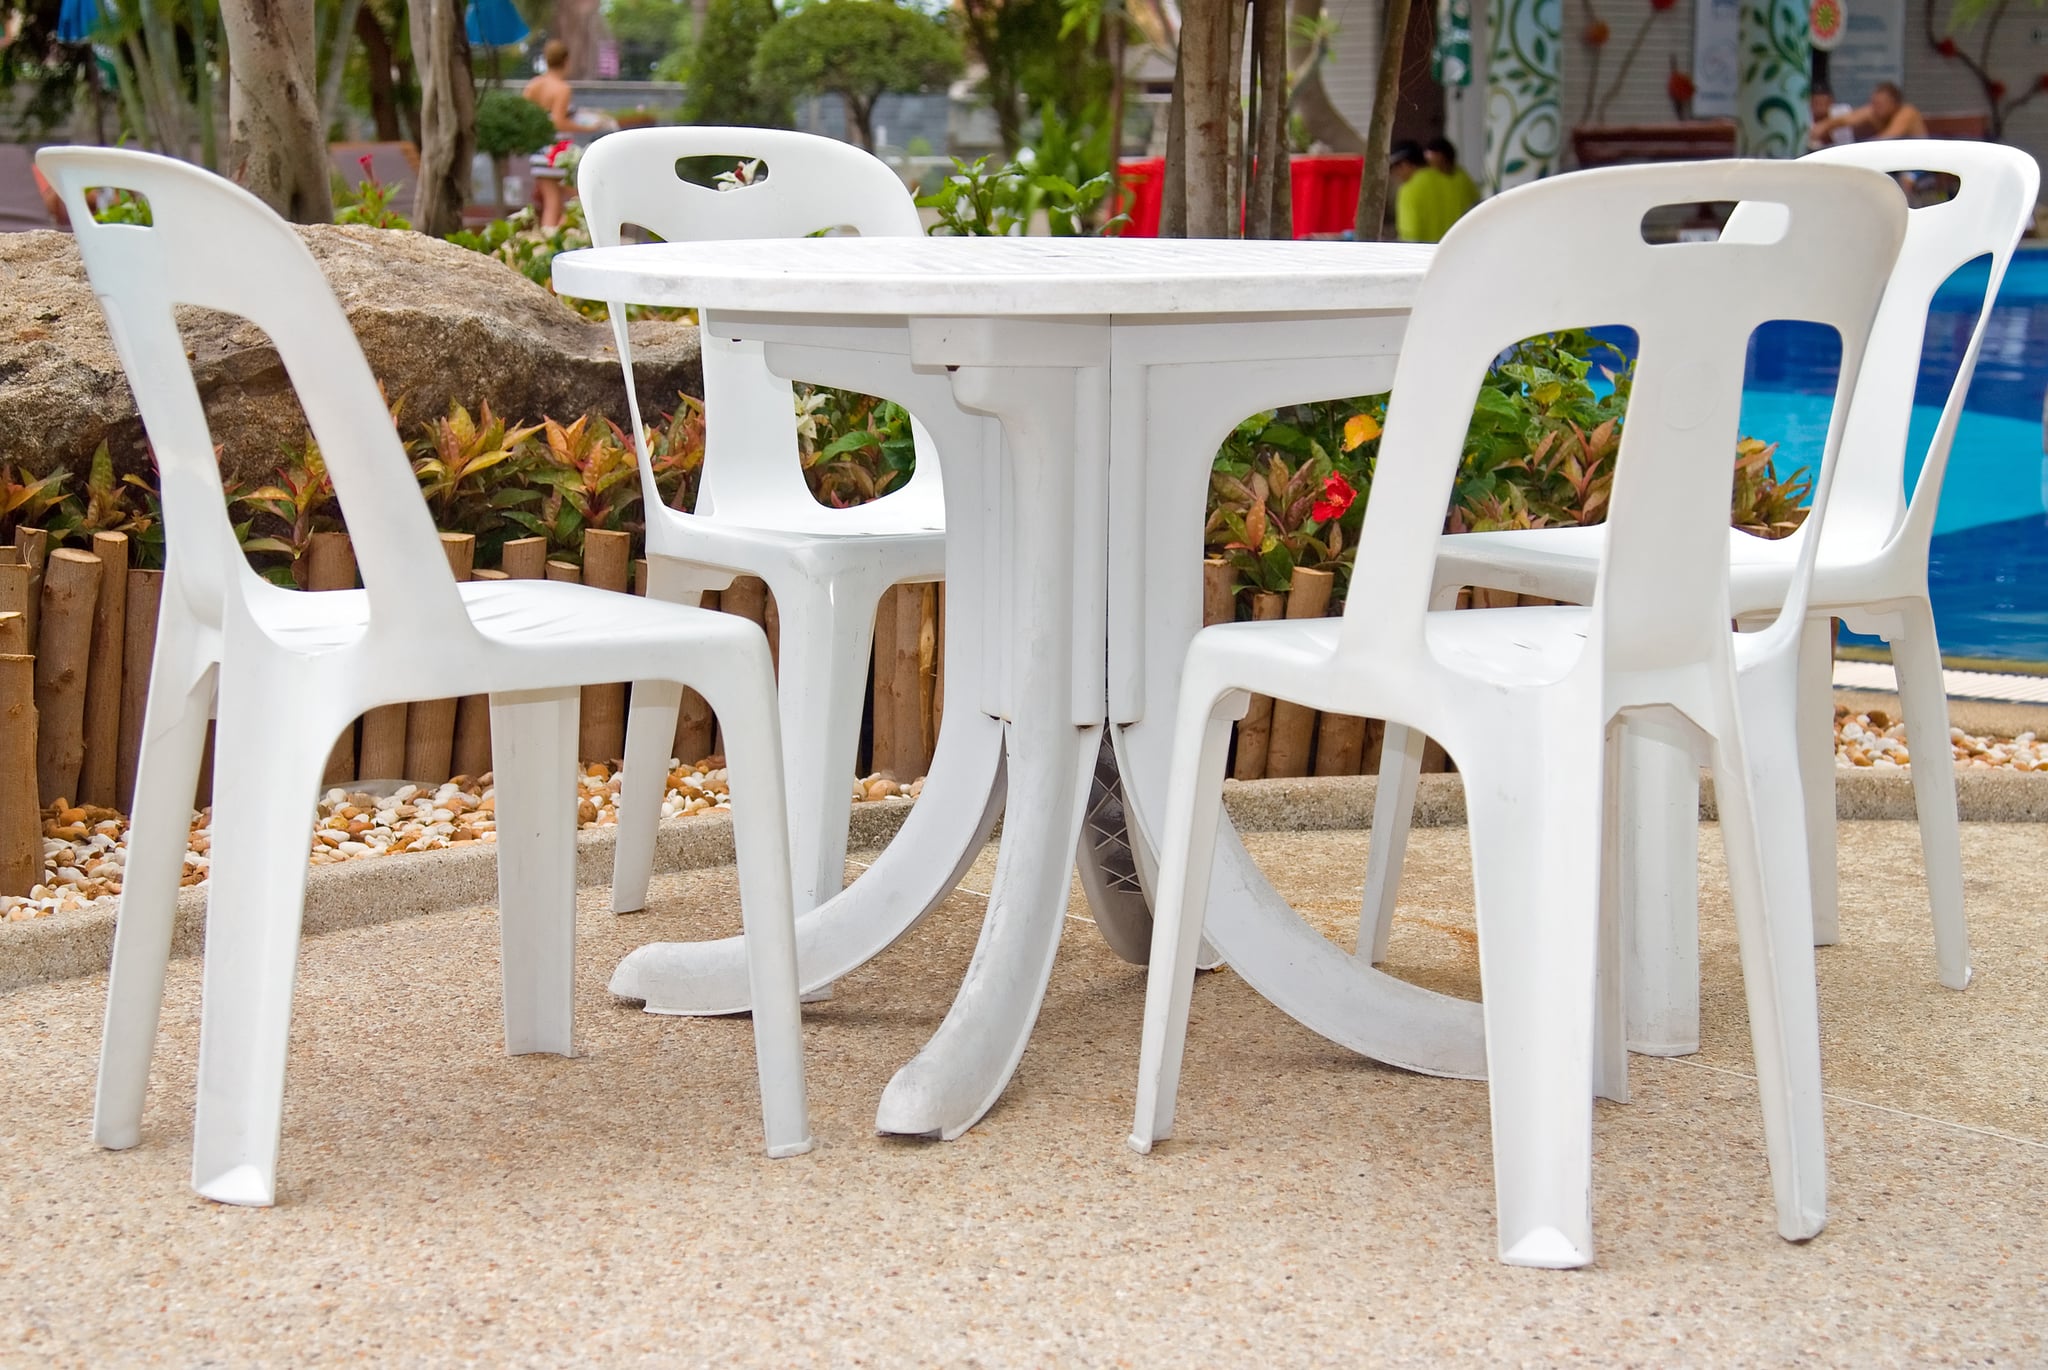 Cut The Legs Off Old Plastic Chairs To Make Poolside Chairs 9